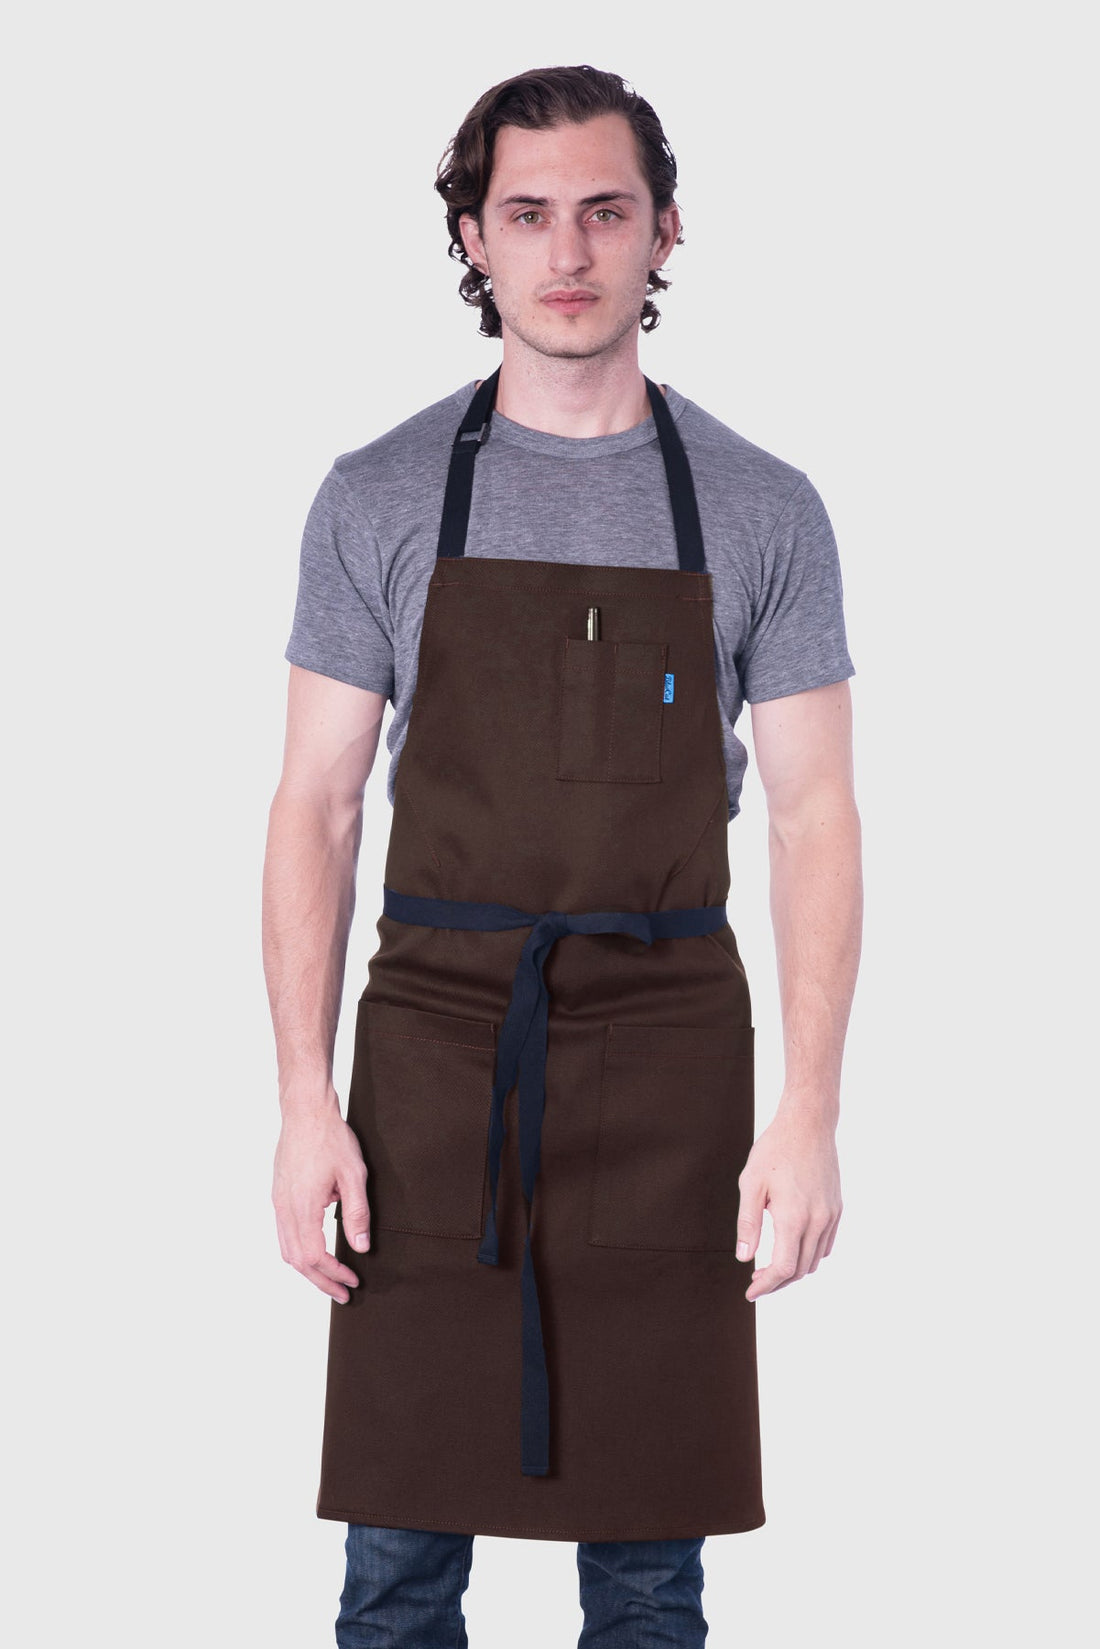 Image of person wearing Line Apron in Cotton Twill. | BlueCut Aprons